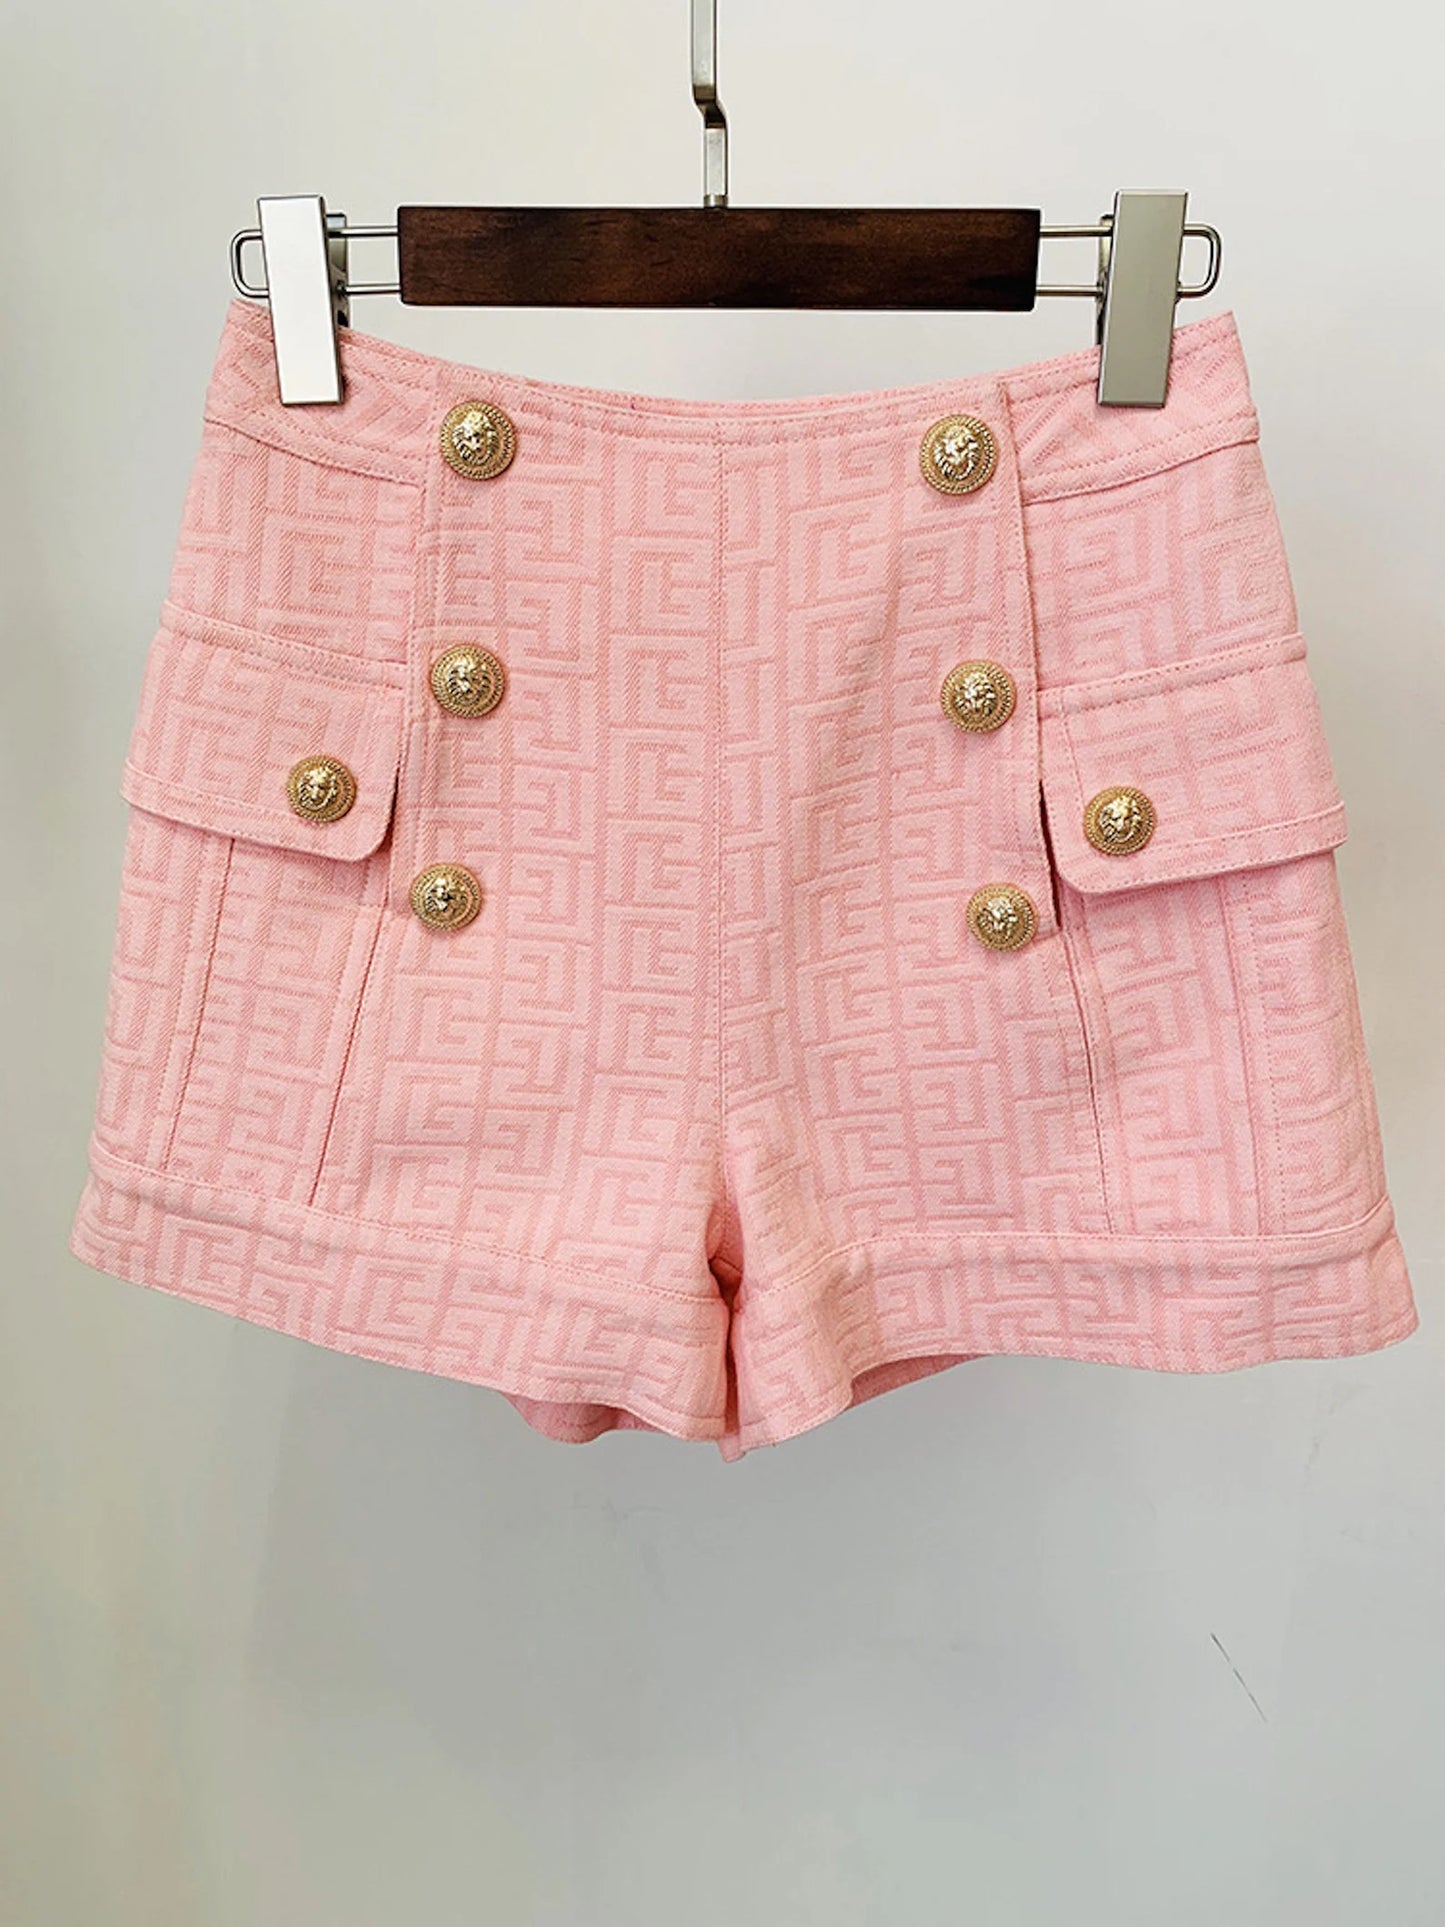 Pink Maze Pattern Short Aviator Bomber Jacket + High Waist Shorts Suit For Ladies - Forerunner in Fashion Enjoy your Spring and Summer season! Put on a lovely attire this Spring. Warm up while projecting a sexy image! One should be in your wardrobe because it emphasises your curves and gives you a confident appearance. Having a strong sweater game is usually a smart idea. 